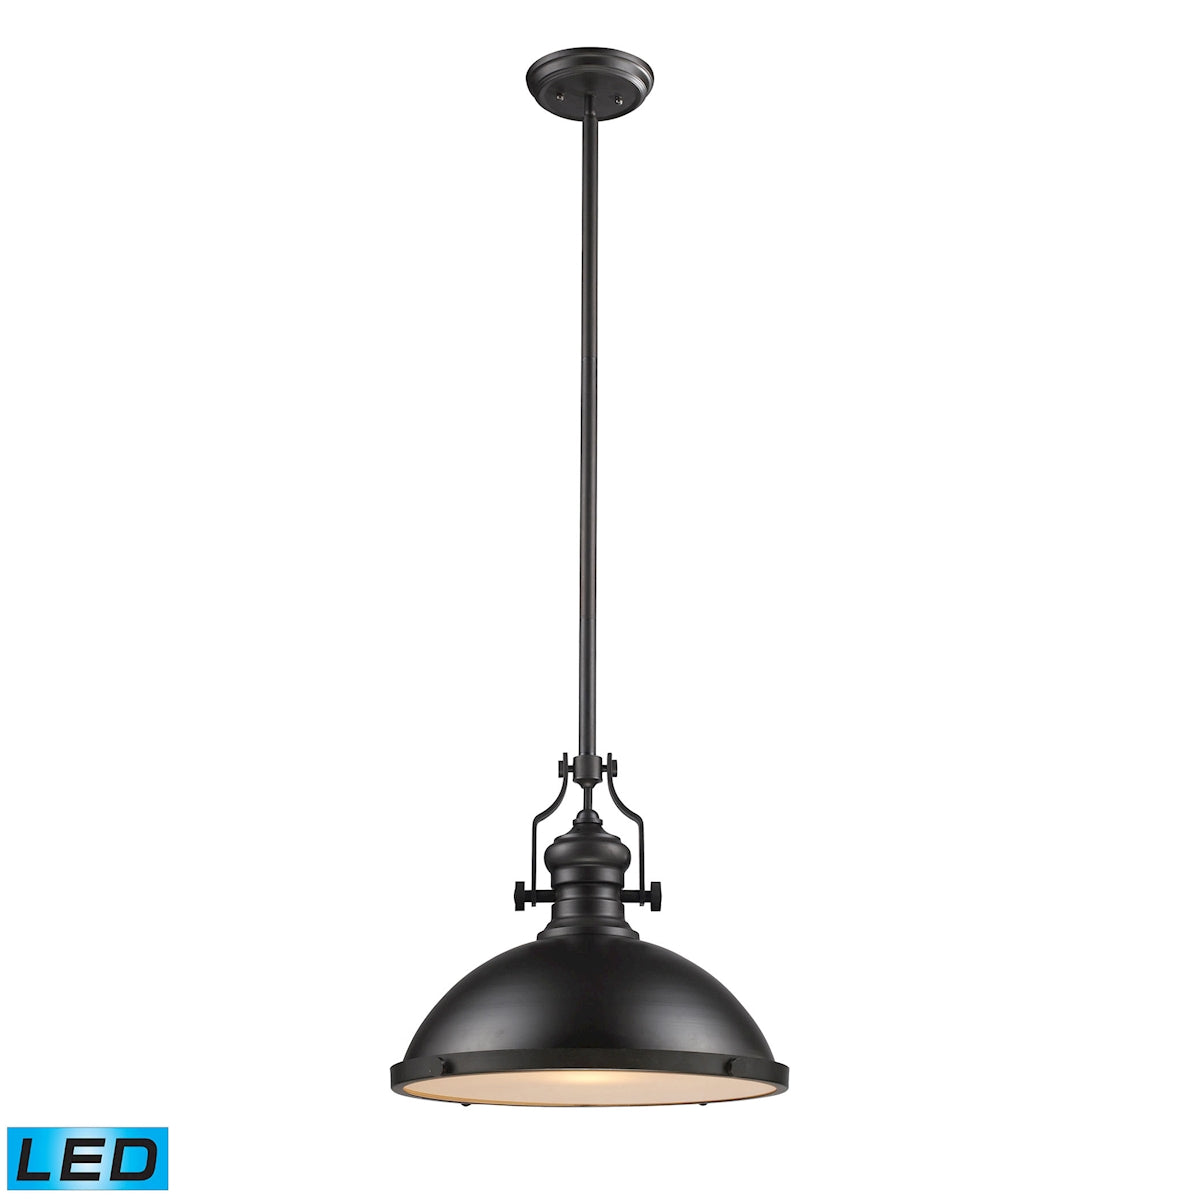 ELK Lighting 66138-1-LED Chadwick 1-Light Pendant in Oiled Bronze with Matching Shade - Includes LED Bulb